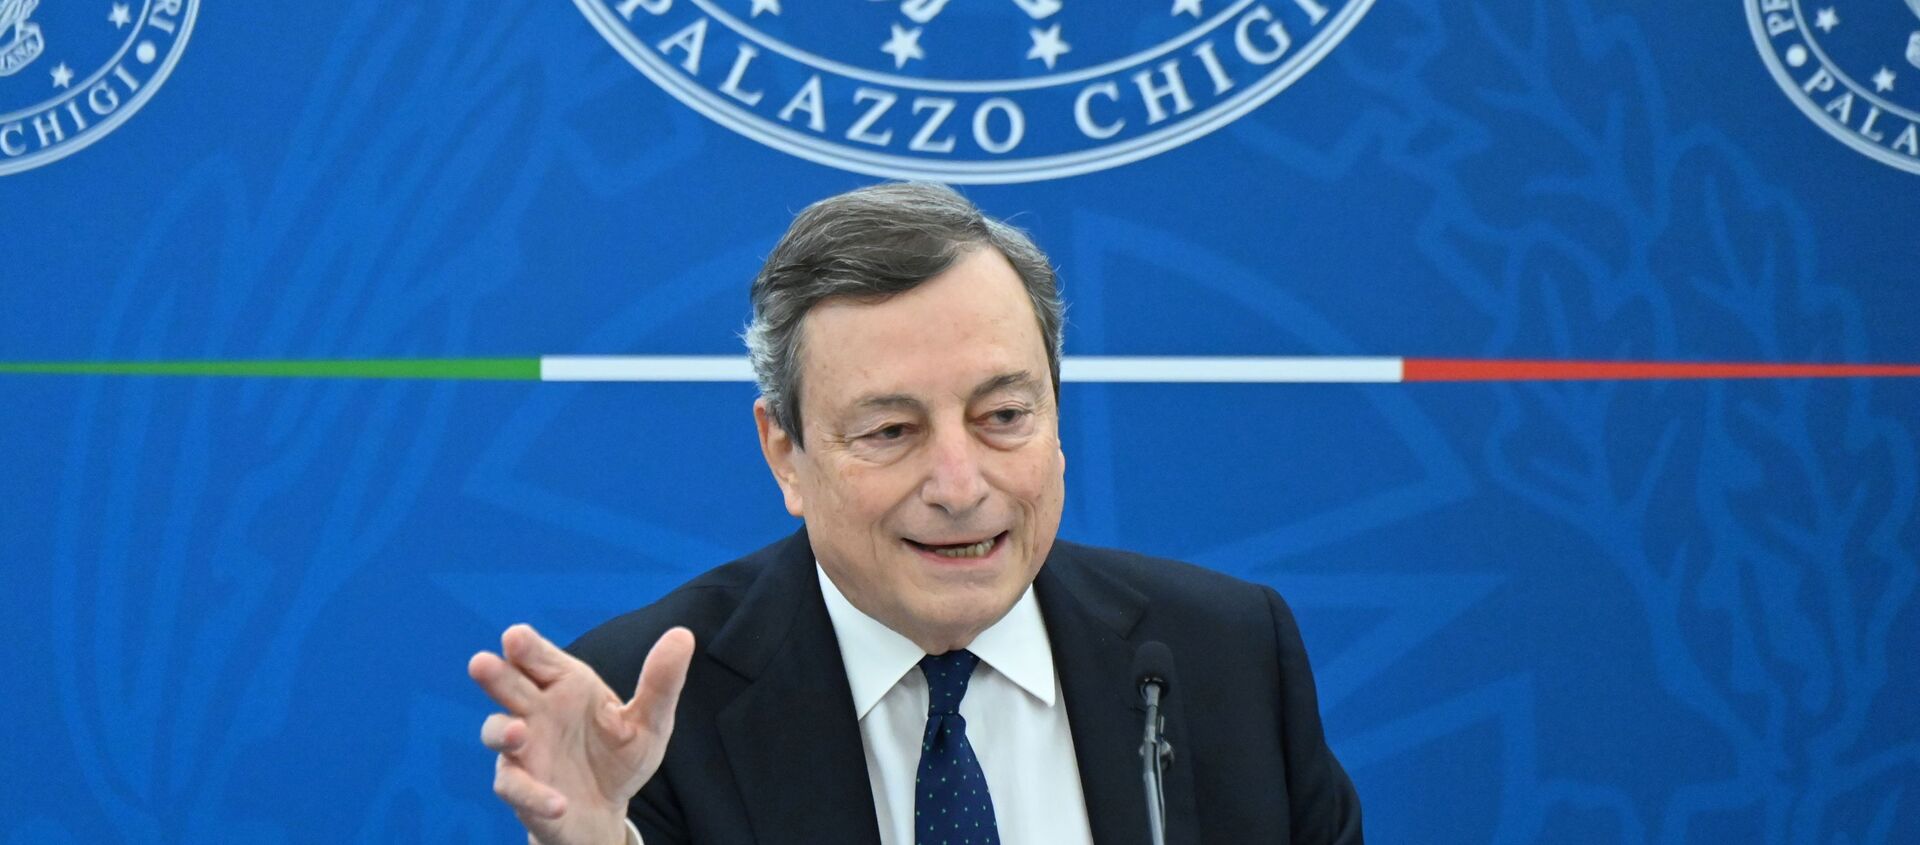 Italy's Prime Minister Mario Draghi speaks during a news conference after a cabinet meeting in Rome, Italy, March 19, 2021. - Sputnik International, 1920